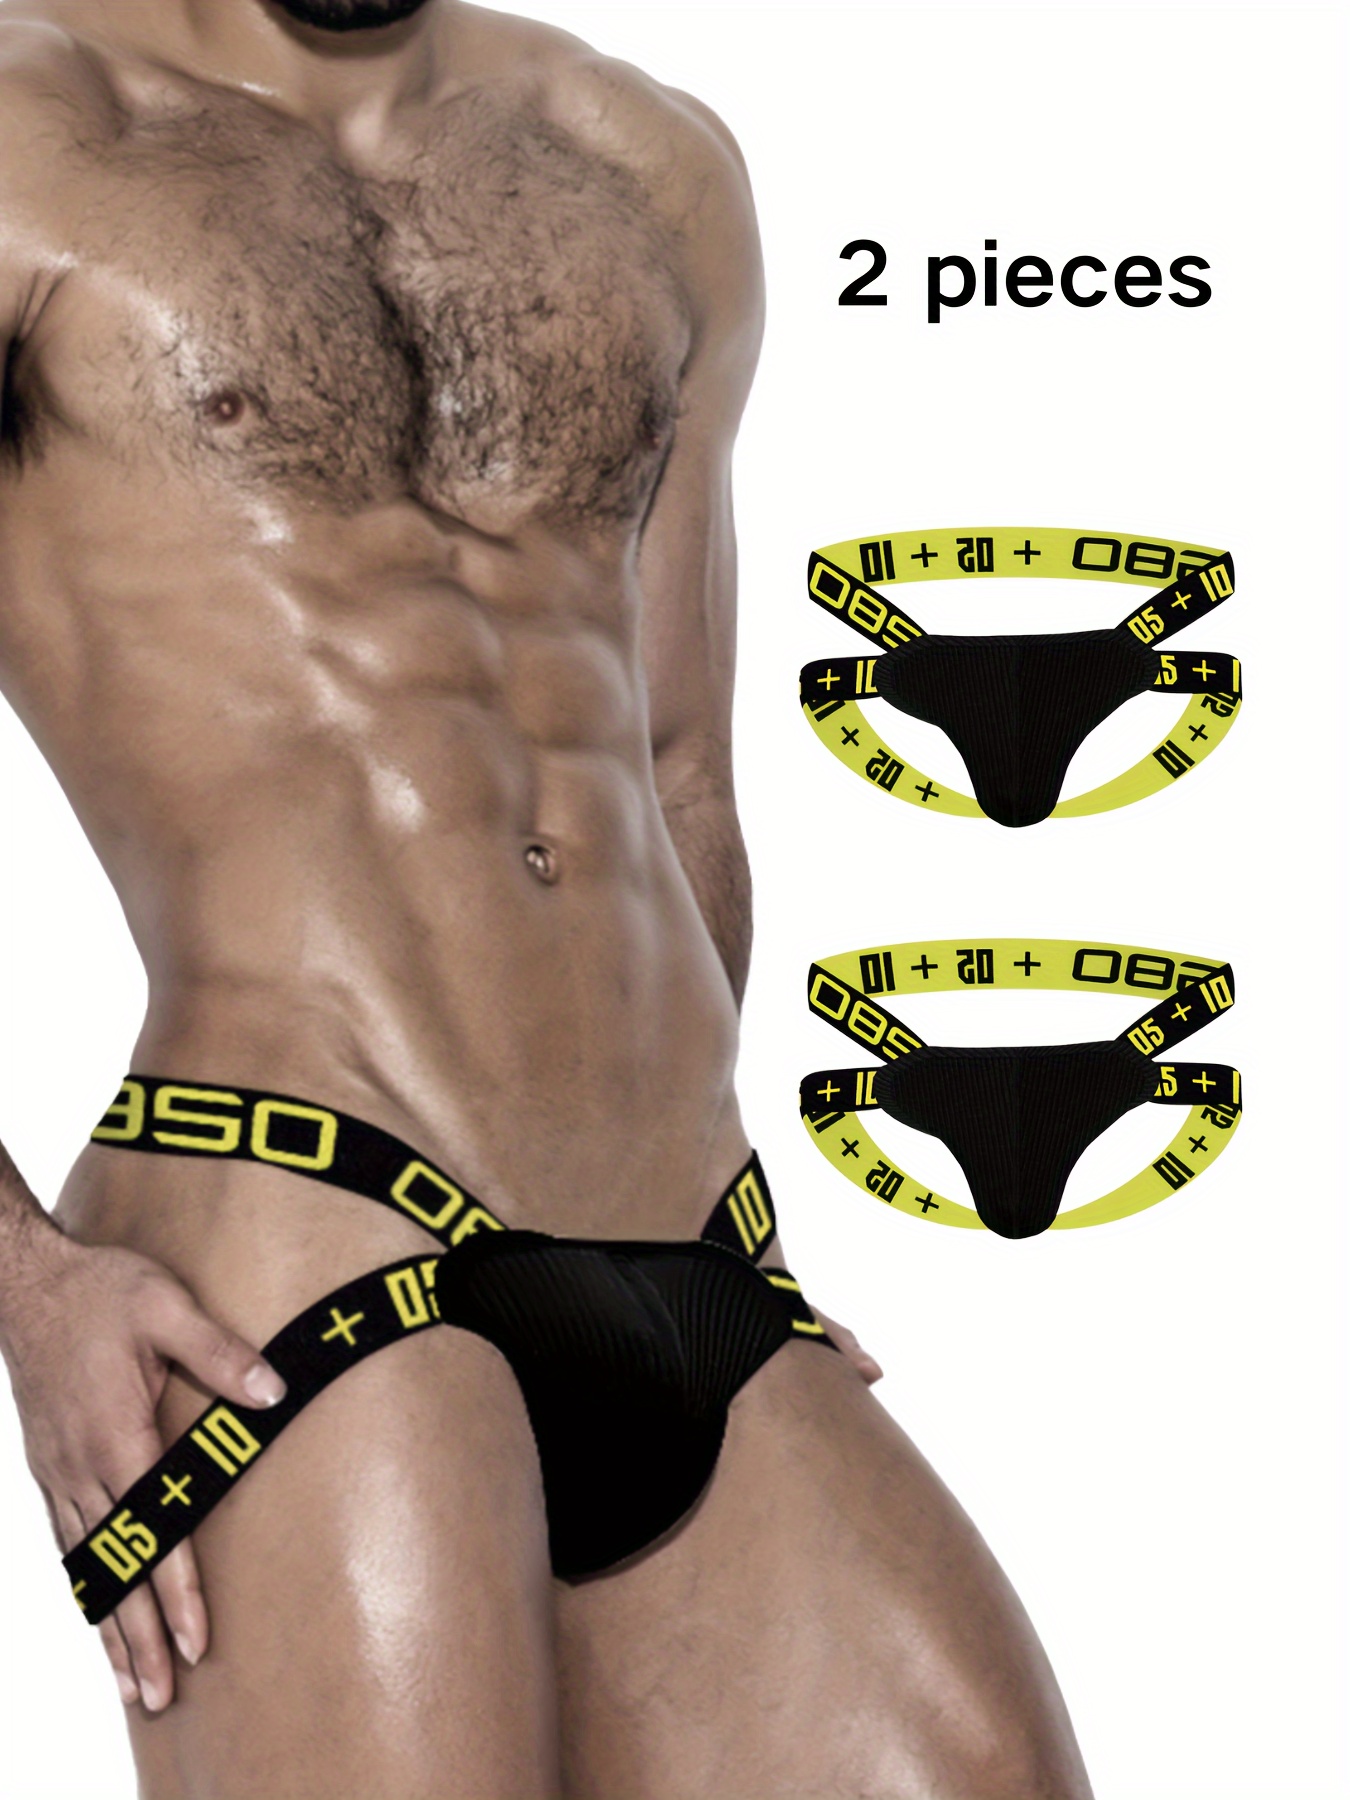  Men's Athletic Supporter Men's Sissy Bra Gay Erotic Gay  Temptation Lace Lingerie,Black,S: Clothing, Shoes & Jewelry